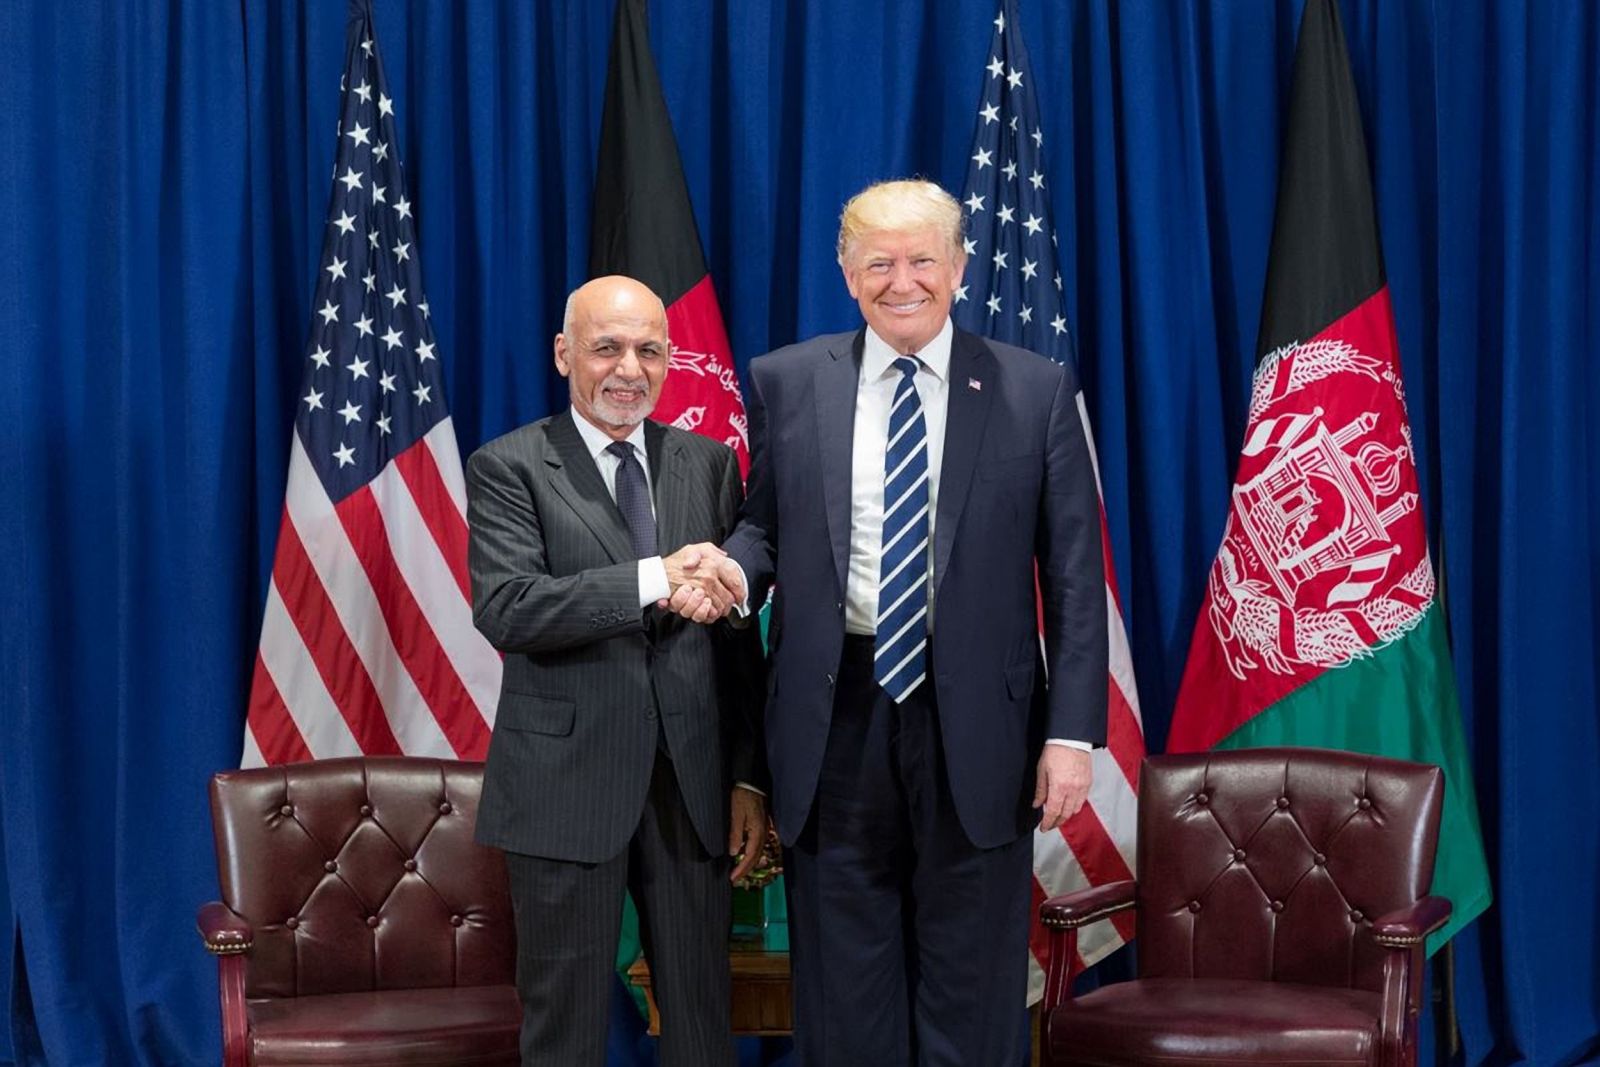 That was then: Trump and Ghani in New York in 2017.